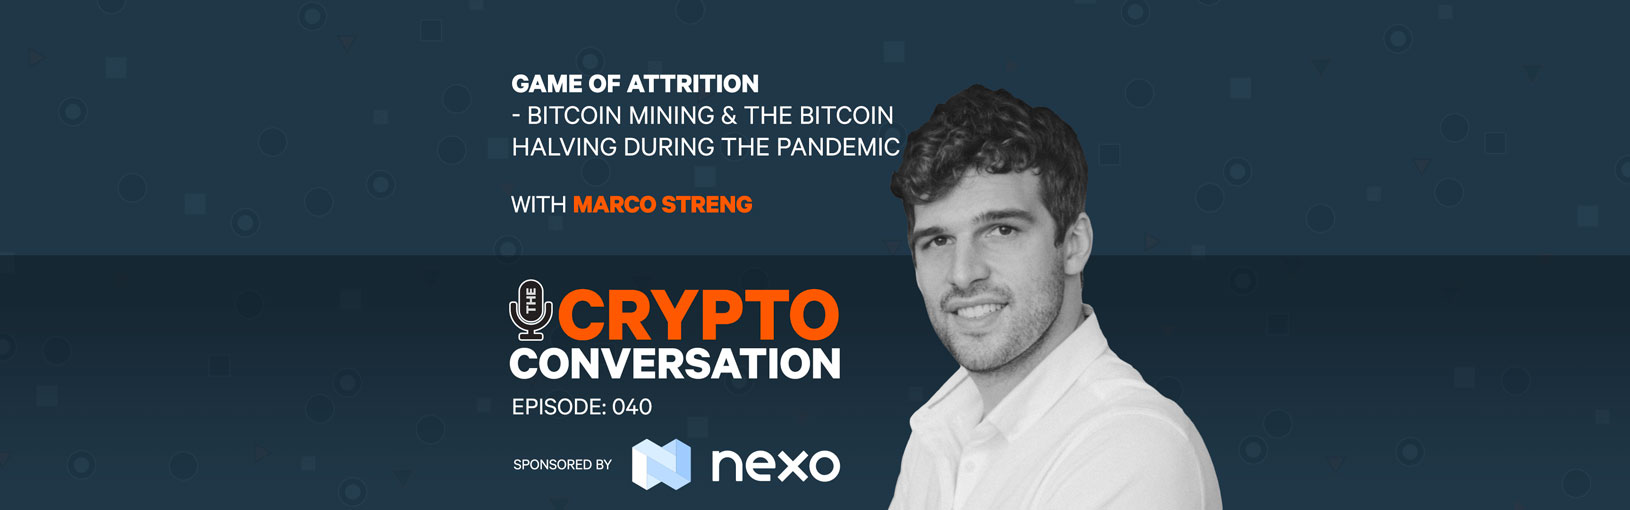 Game of Attrition – Bitcoin Mining & the Bitcoin Halving during the pandemic